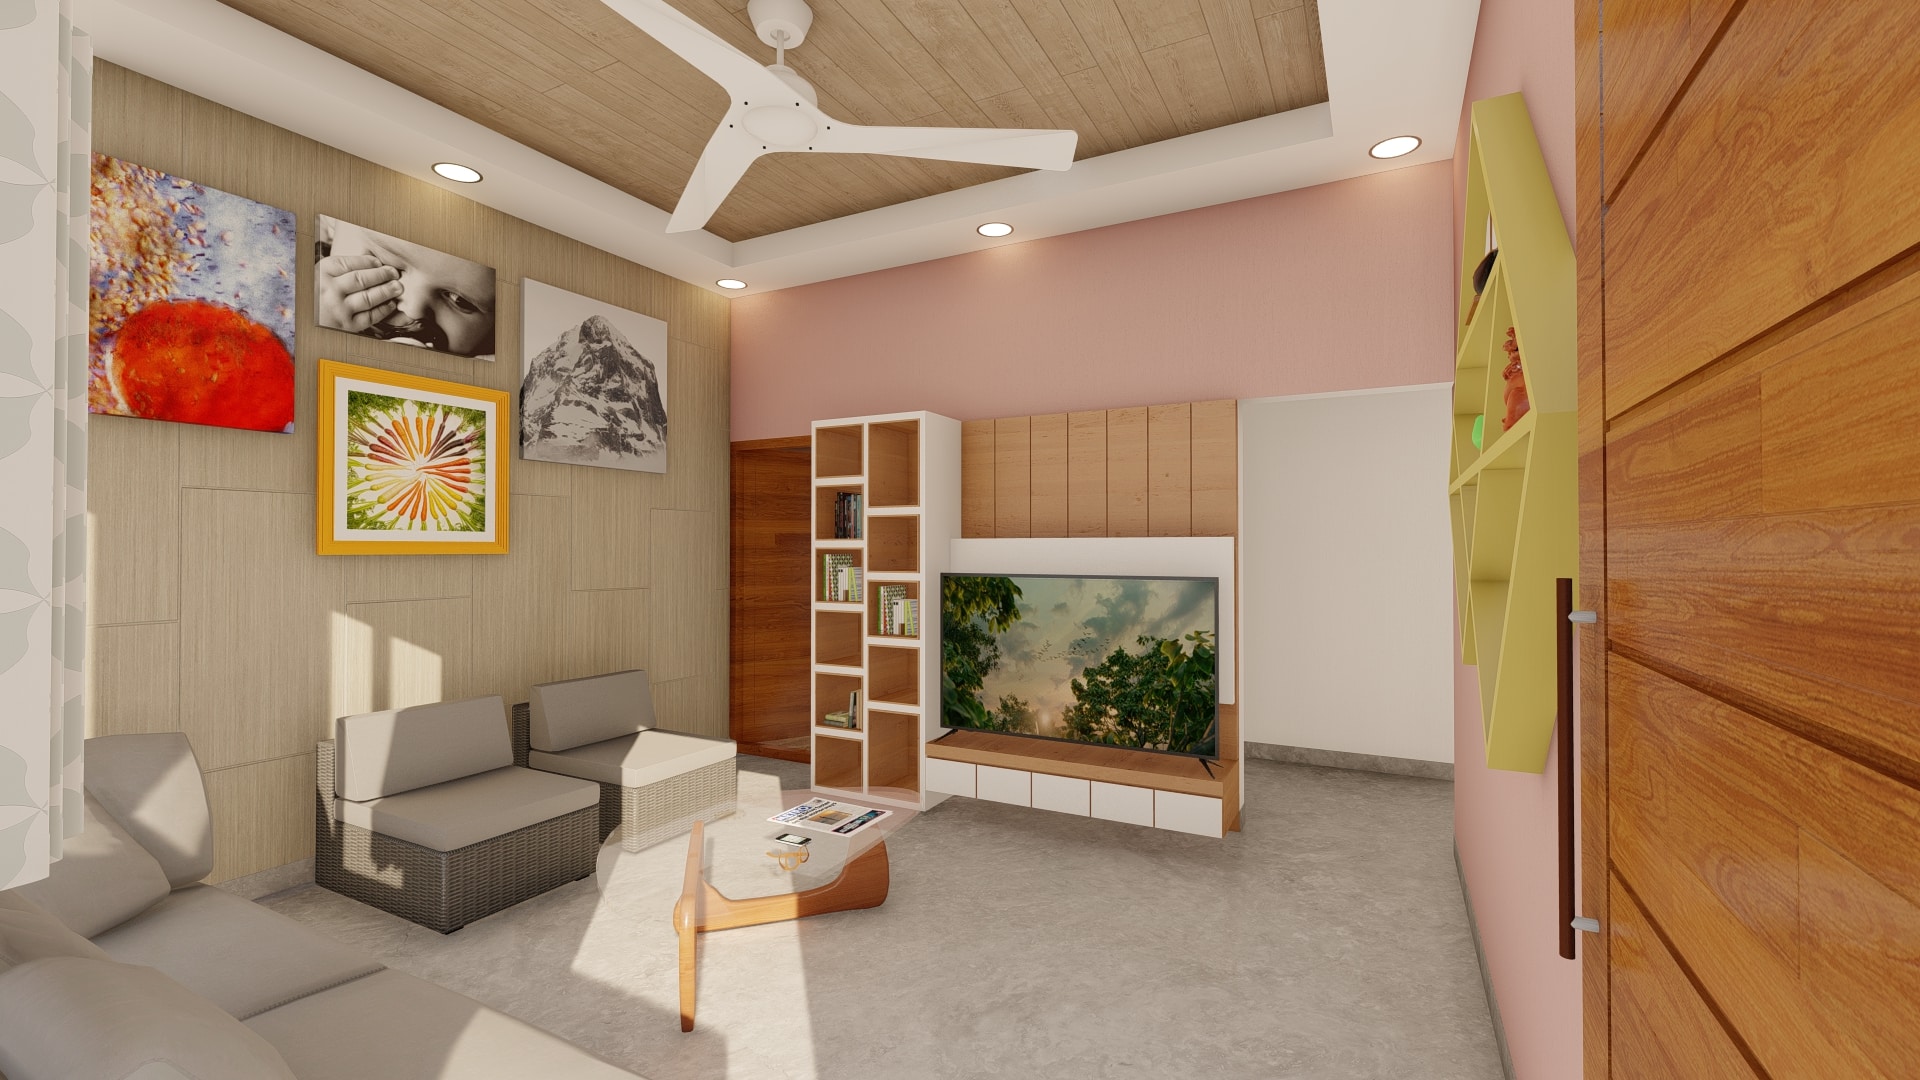 living room of new bungalow home design west by urban terrace 30x50 sq ft